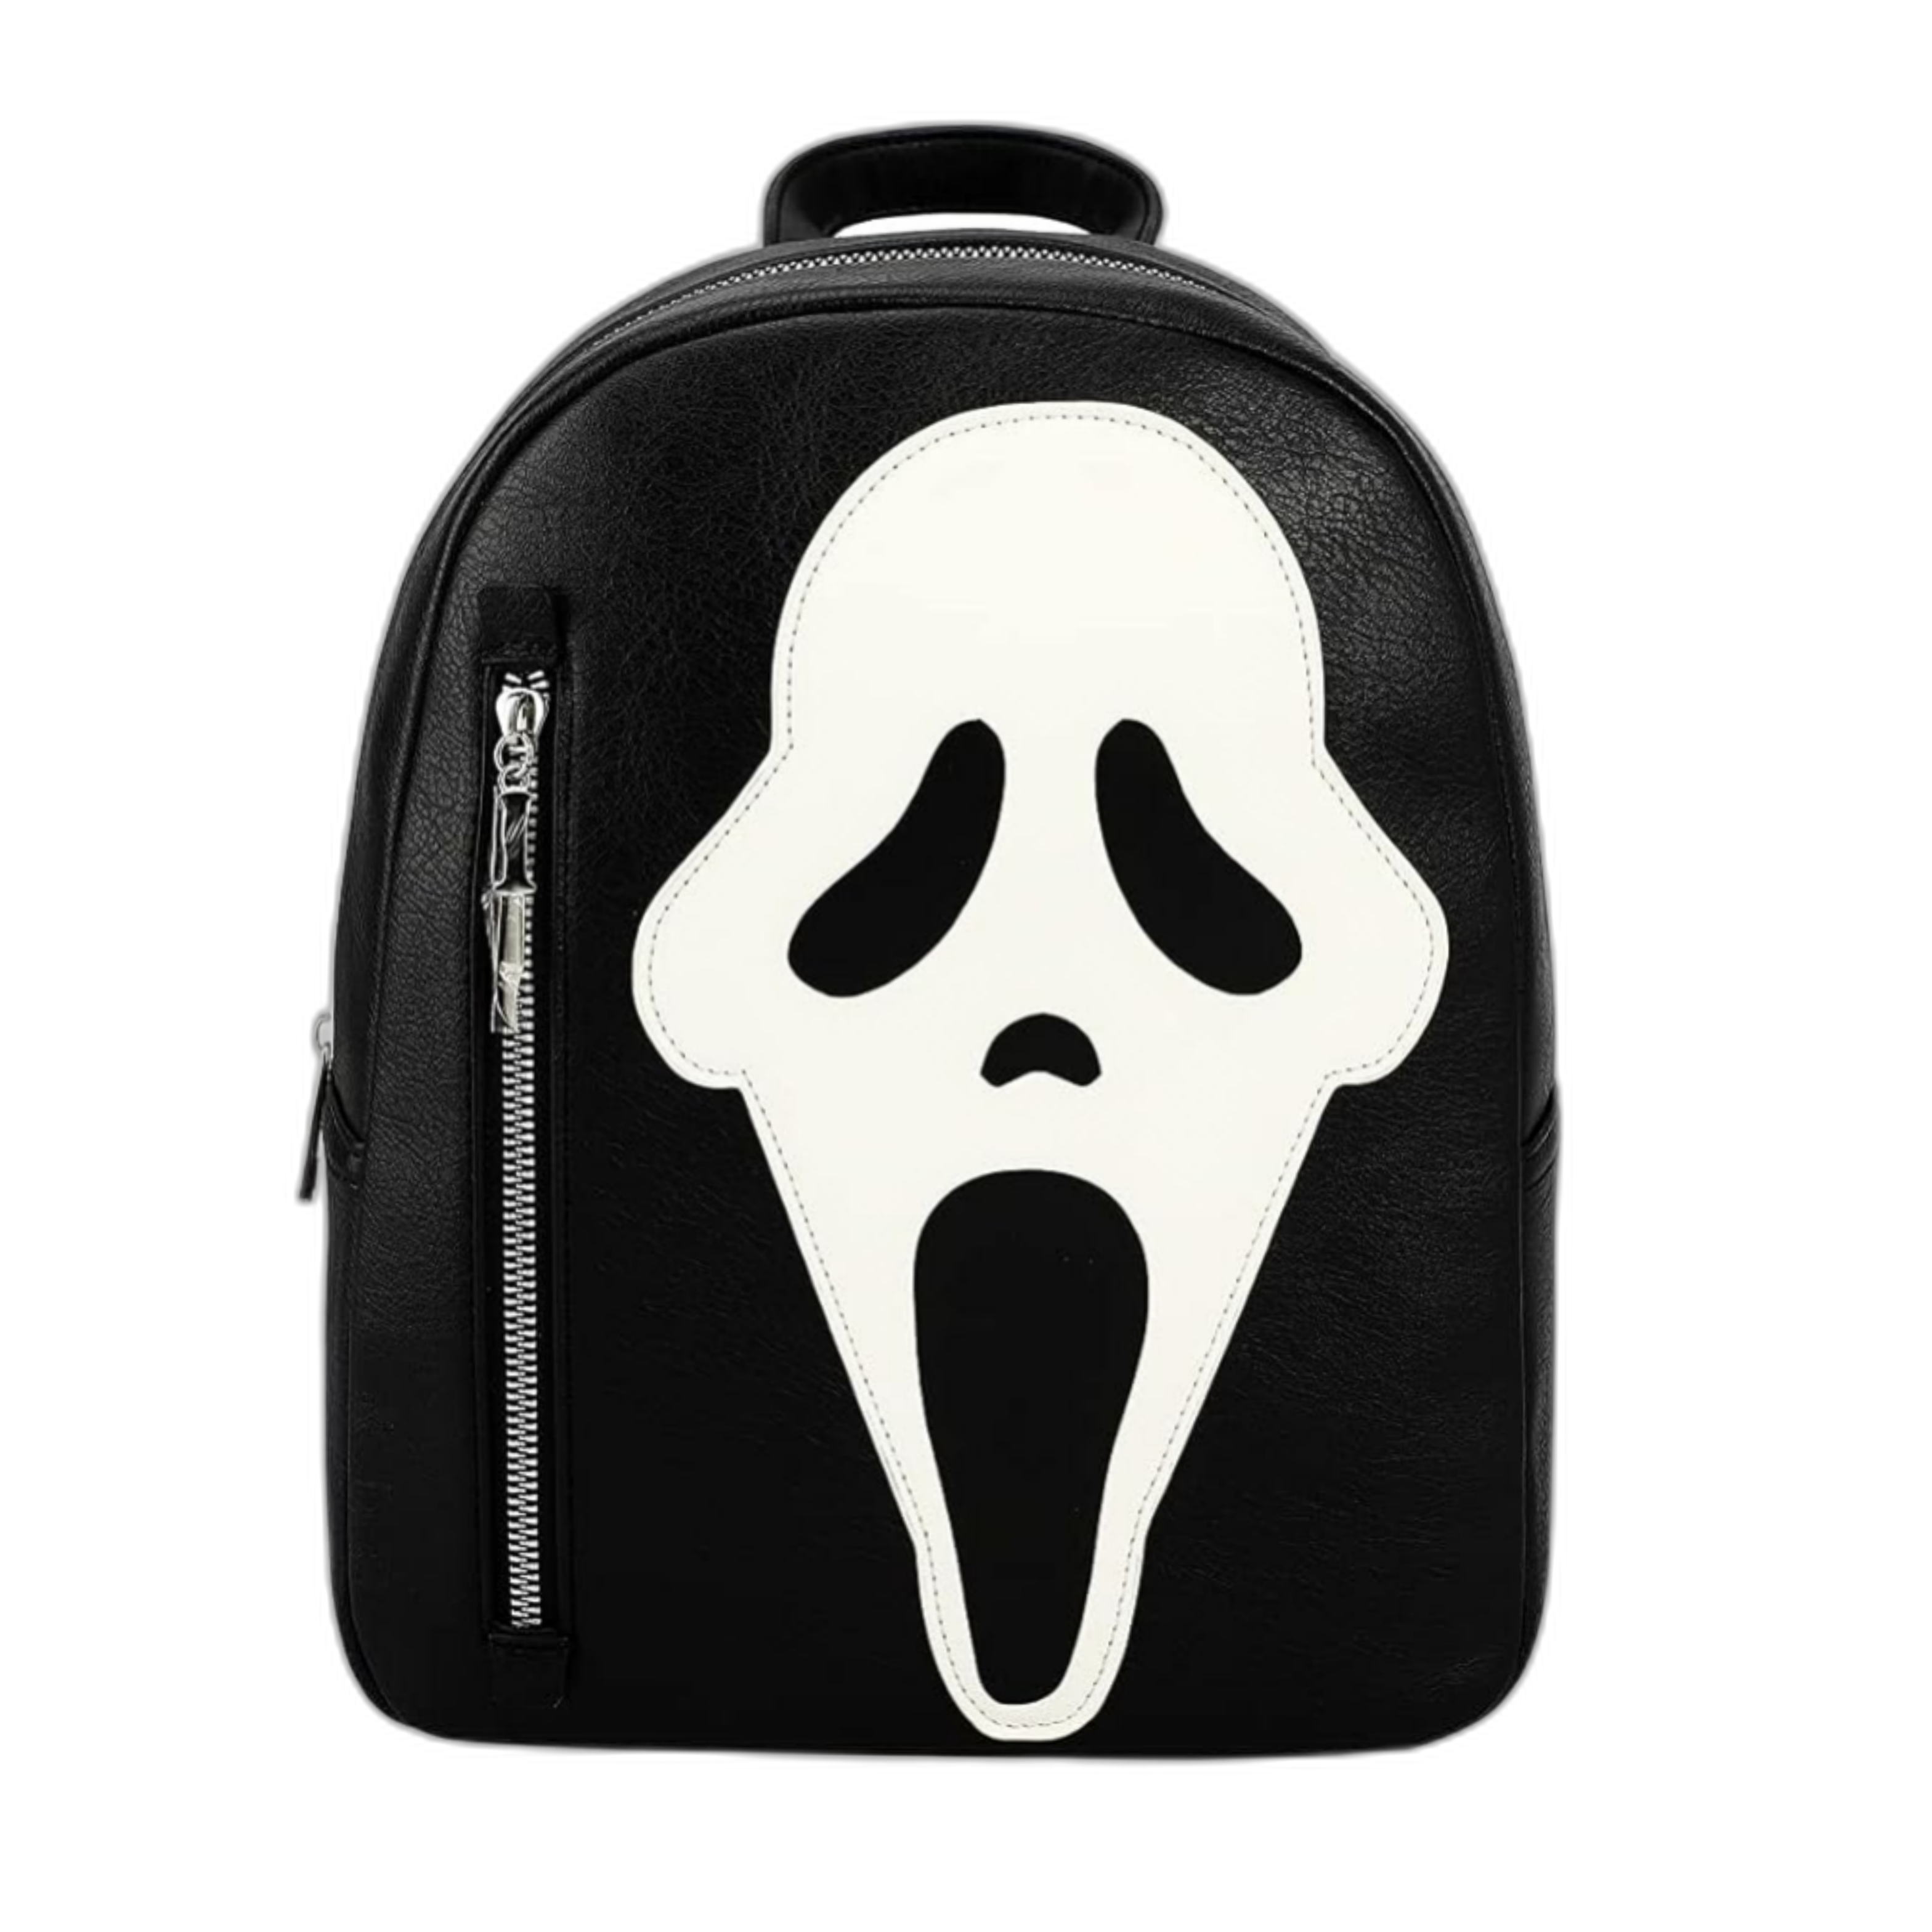 Black mini packpack featuring the ghostface mask and two zippers, the mask also glowing in the dark. 